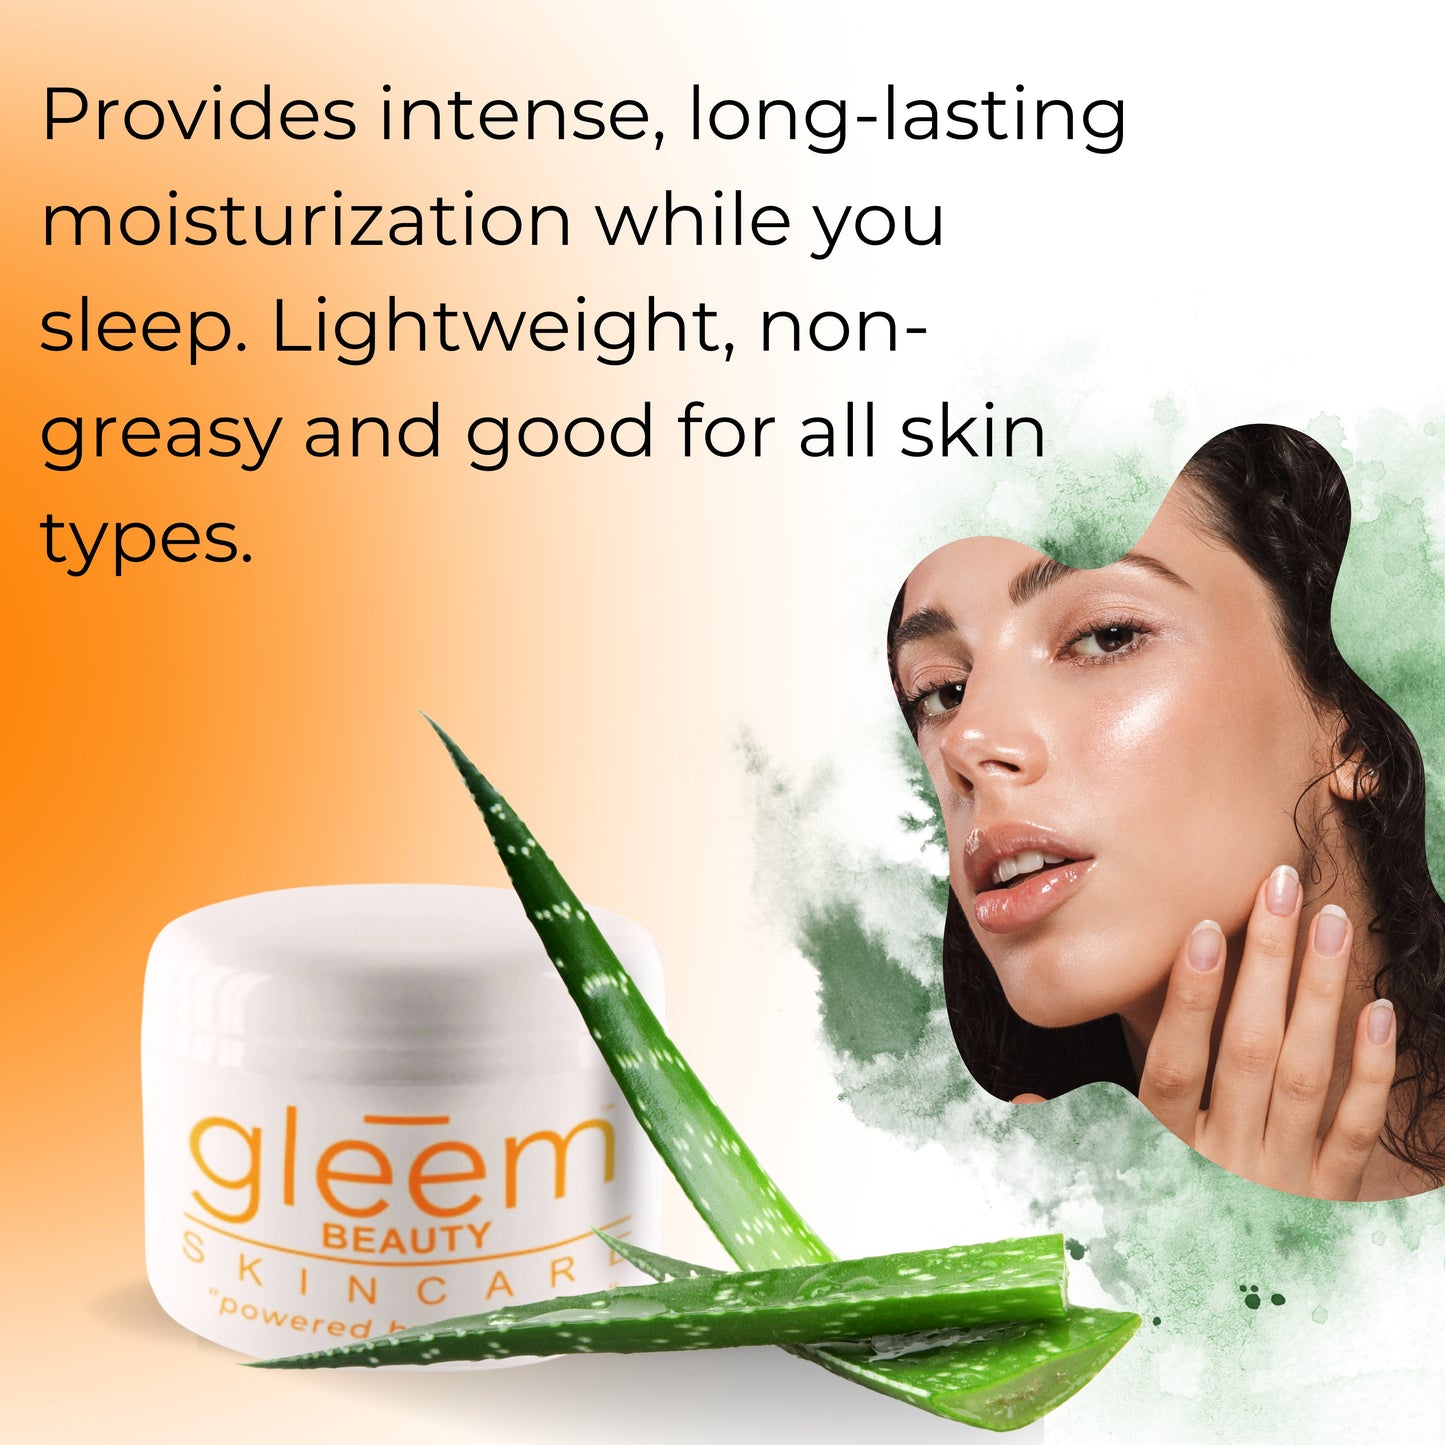 Provides intense, long-lasting moisturization while you sleep. Lightweight, non-greasy and good for all skin types.